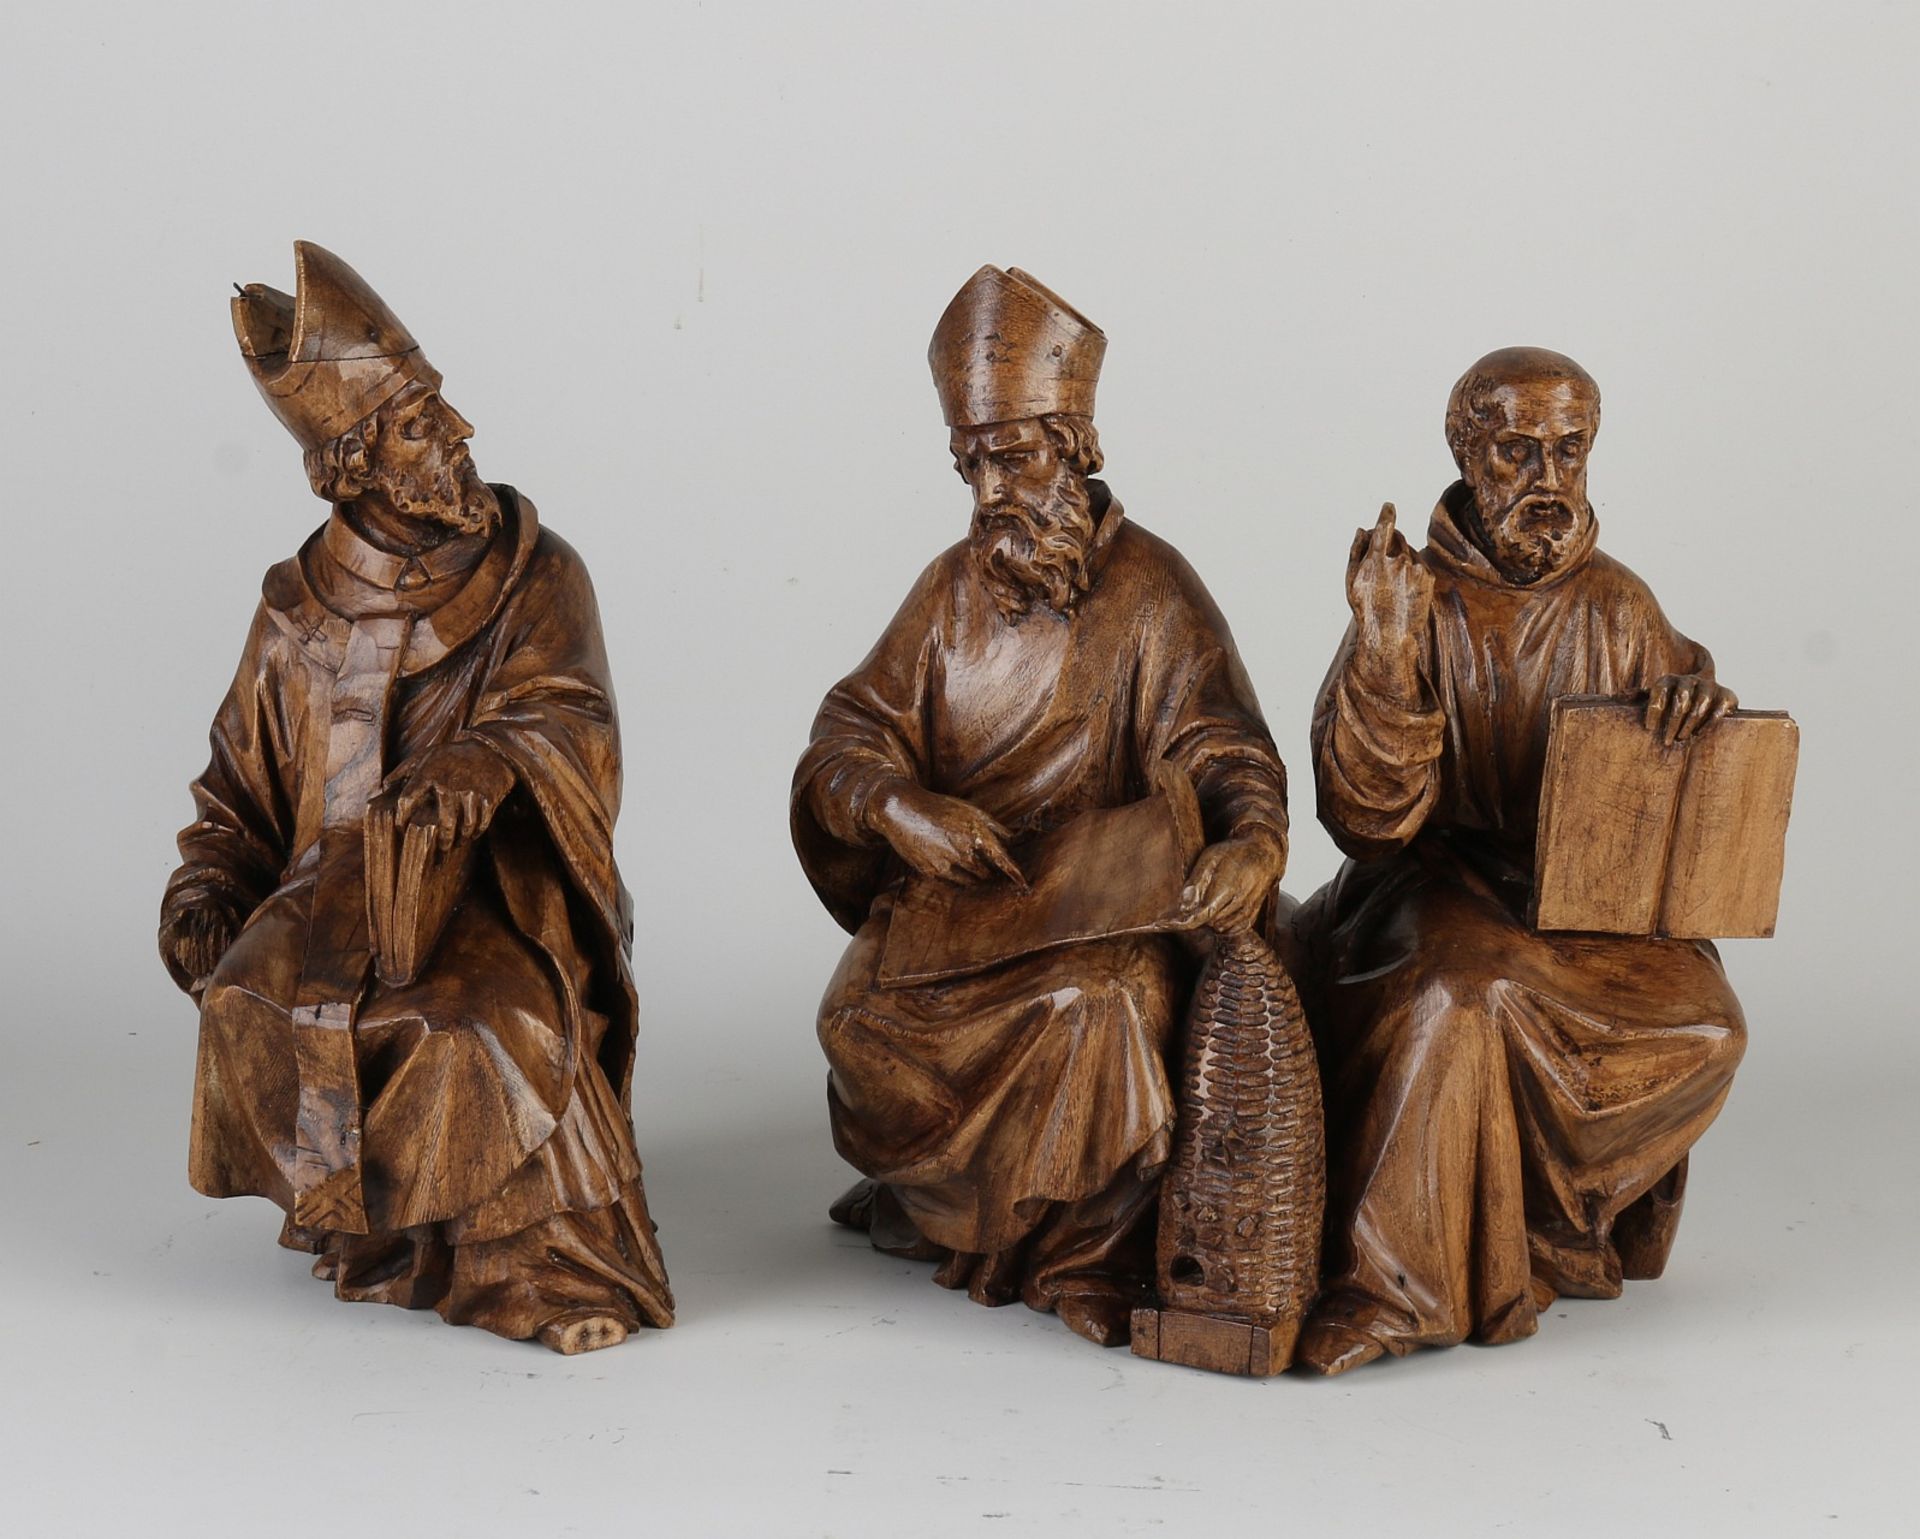 Two wooden statues